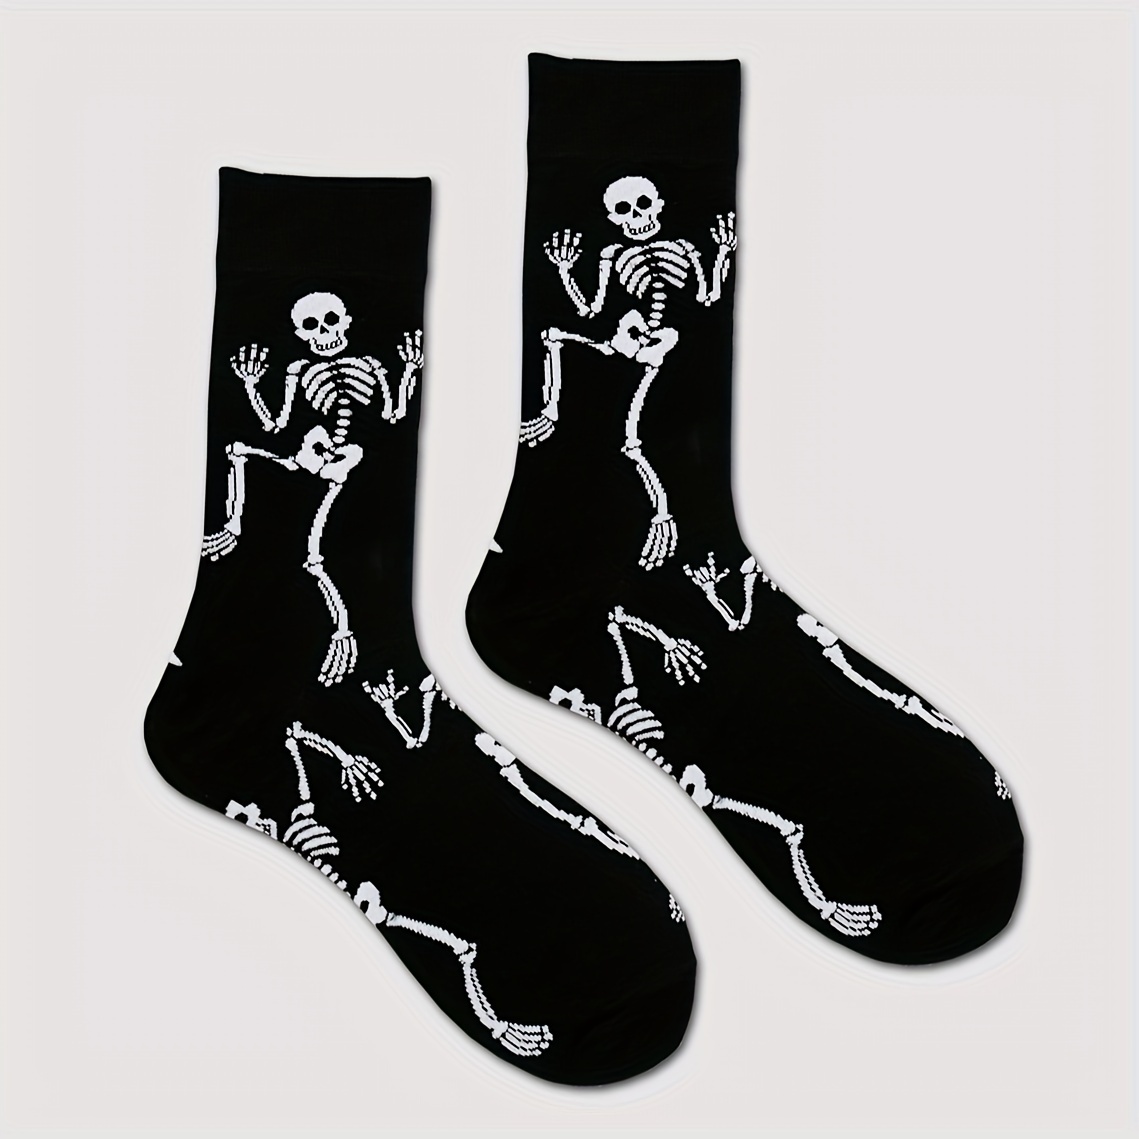 

A Pair Of Men's Halloween Style Pattern Crew Socks, Comfy Breathable Soft Socks, Best Halloween Gifts For Boyfriend